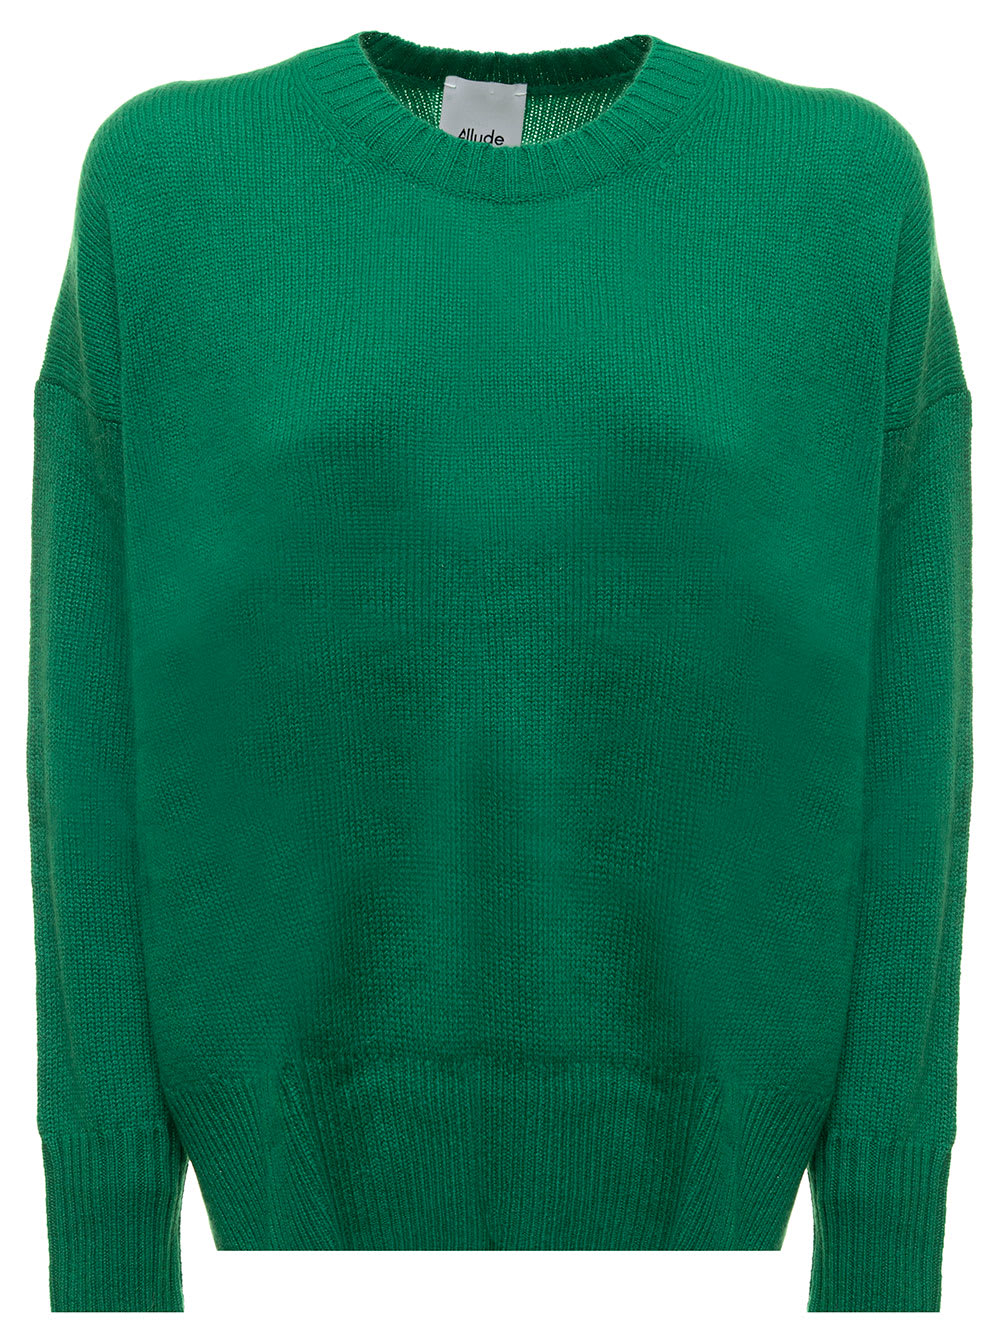 Cashmere Green Sweater Allude Woman